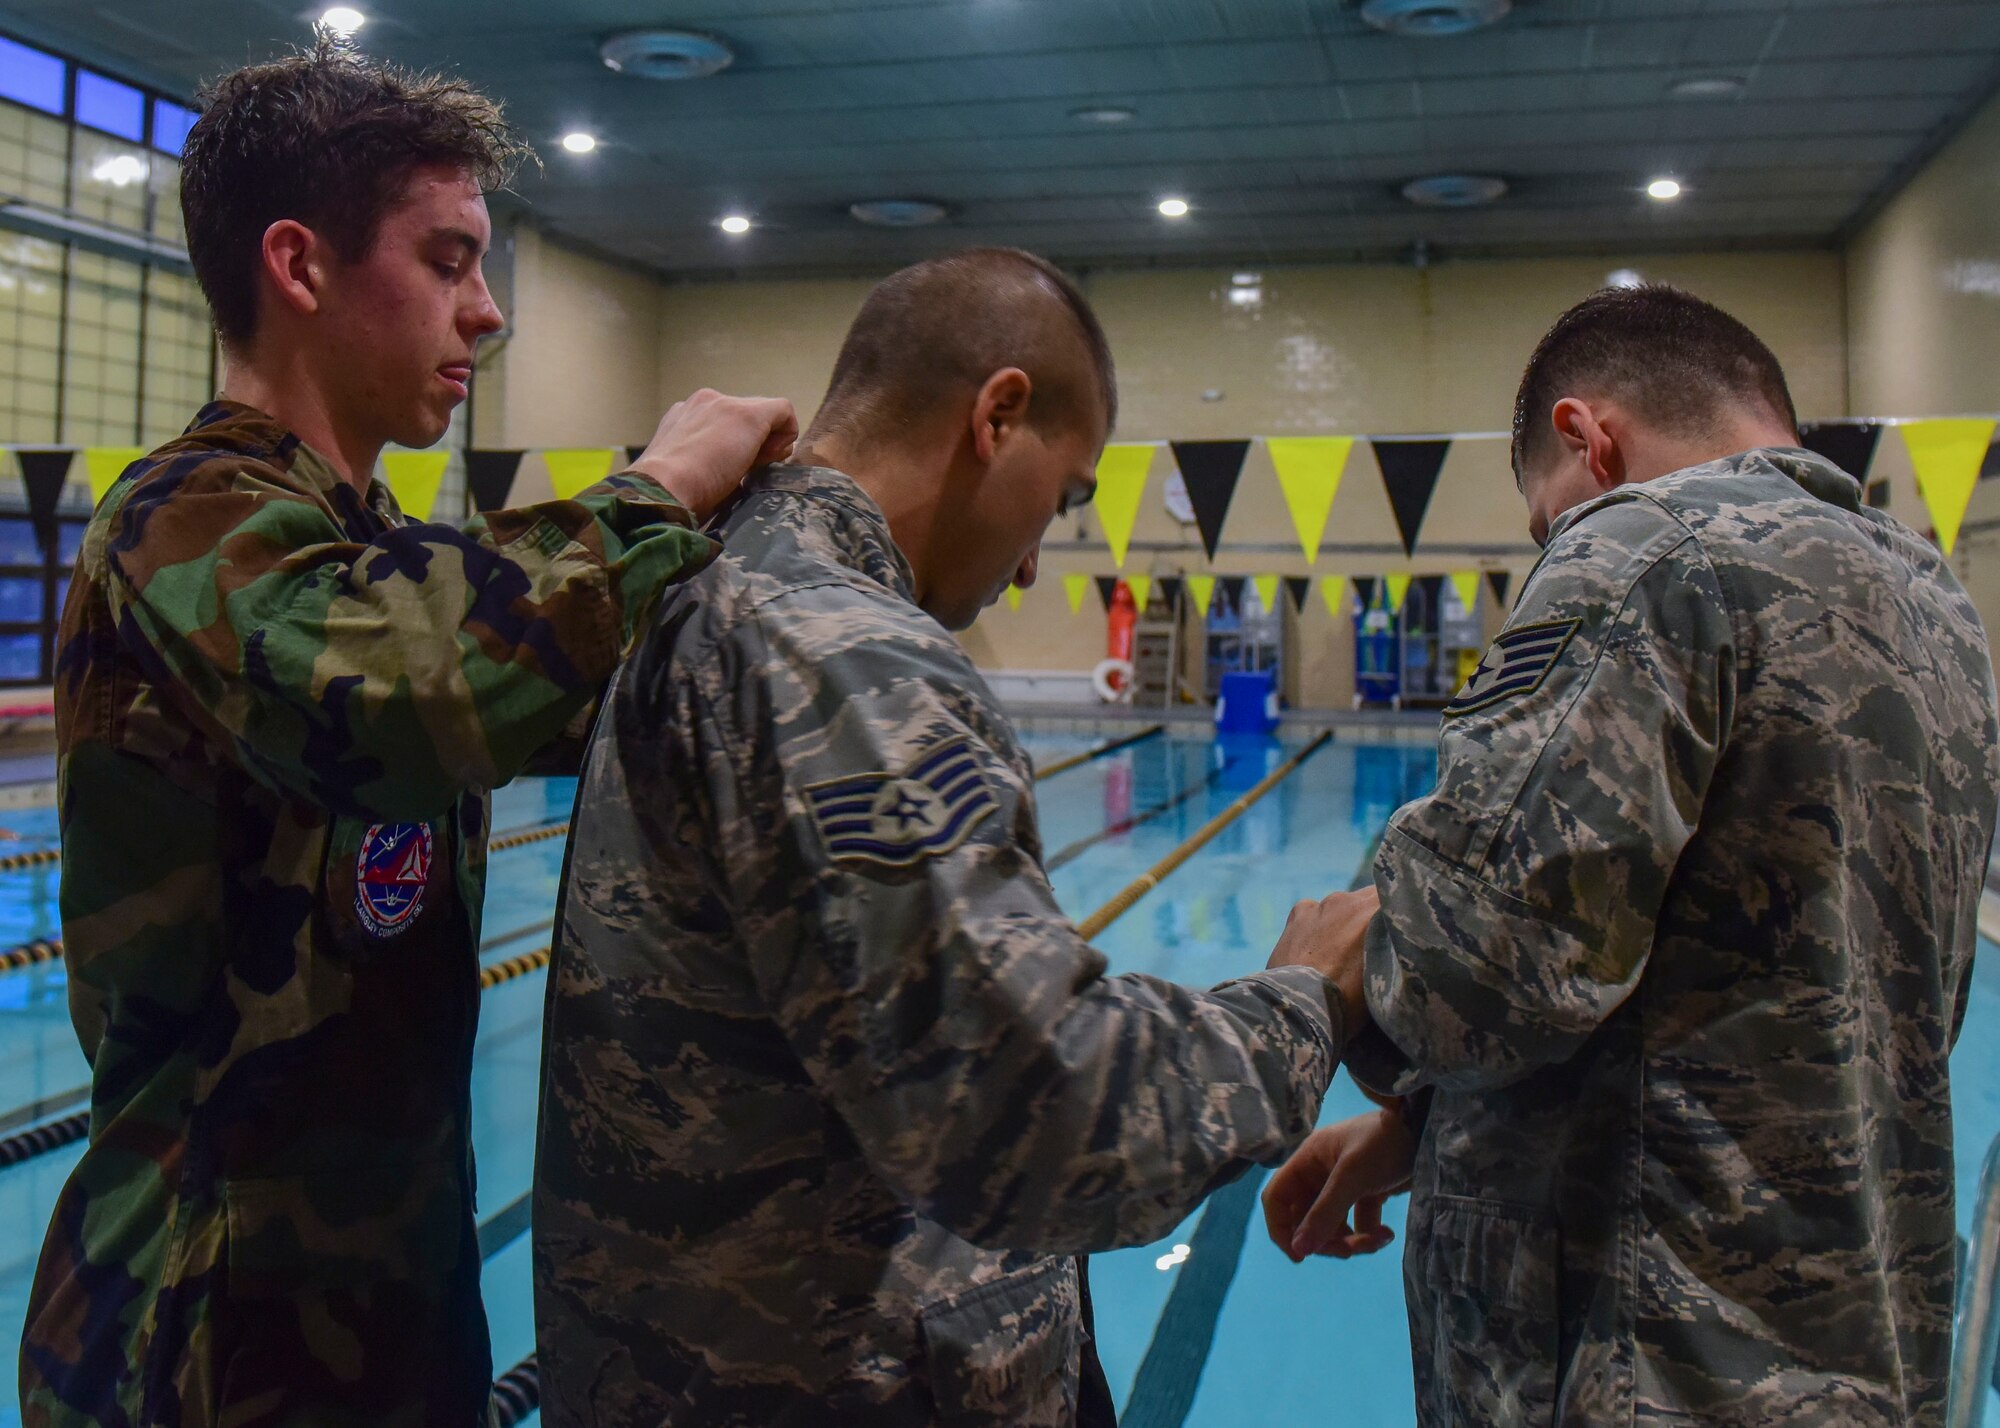 (From Left) U.S. Civil Air Patrol Cadet 1st Lt. Thomas Hall, U.S. Air Force Staff Sgt. Michael Svoleantopoulos, 497th Operation Support Squadron weapons tactician, and U.S. Air Force Staff Sgt. Dajon Begin, 45th Intelligence Squadron full motion video imagery mission supervisor, help each other prepare their uniforms for the pool at Fort Eustis’ Anderson Field House at Joint Base Langley-Eustis, Virginia, March 6, 2018.